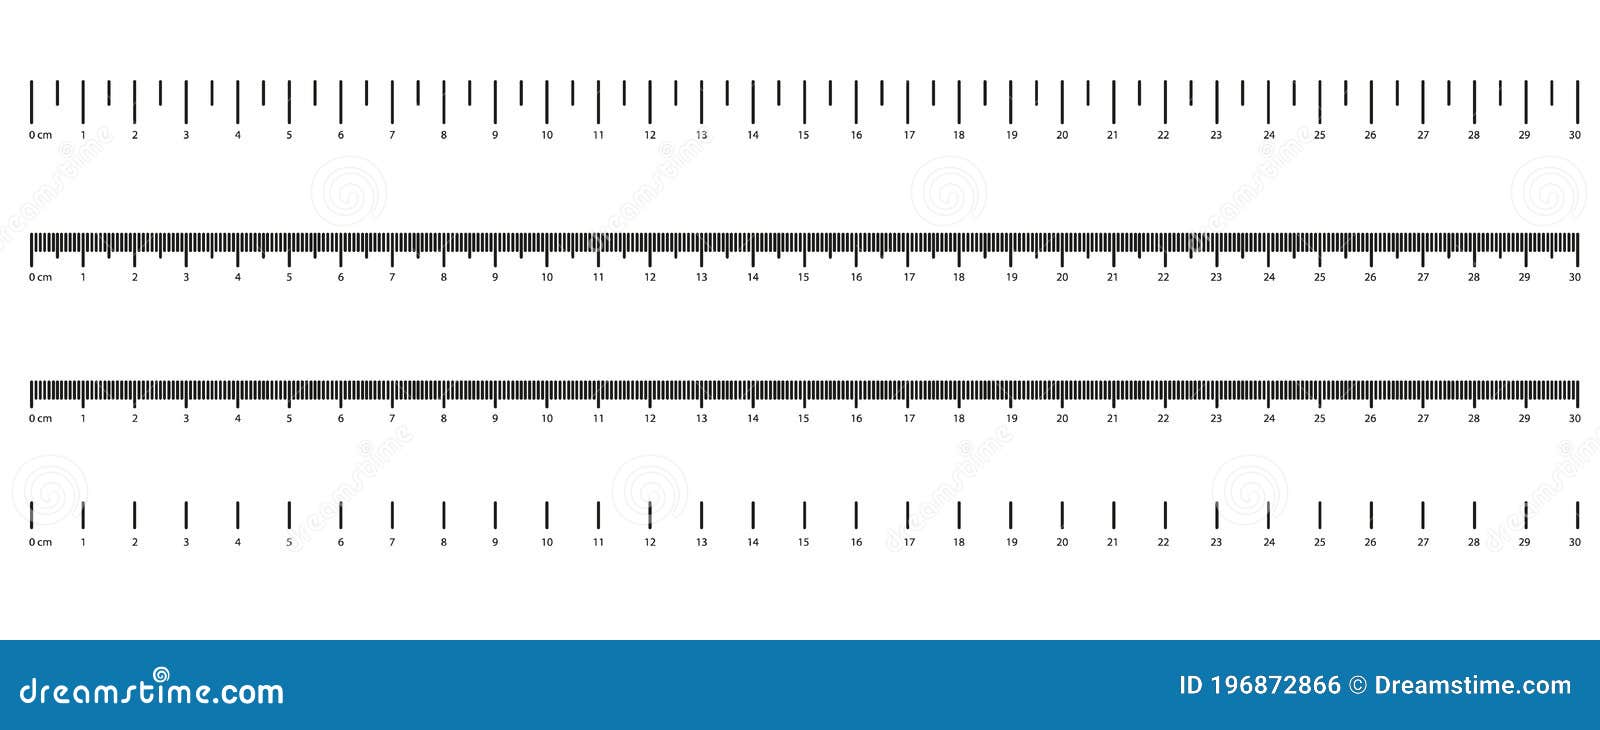 Metric Imperial Rulers. Scale for a ruler in inches and